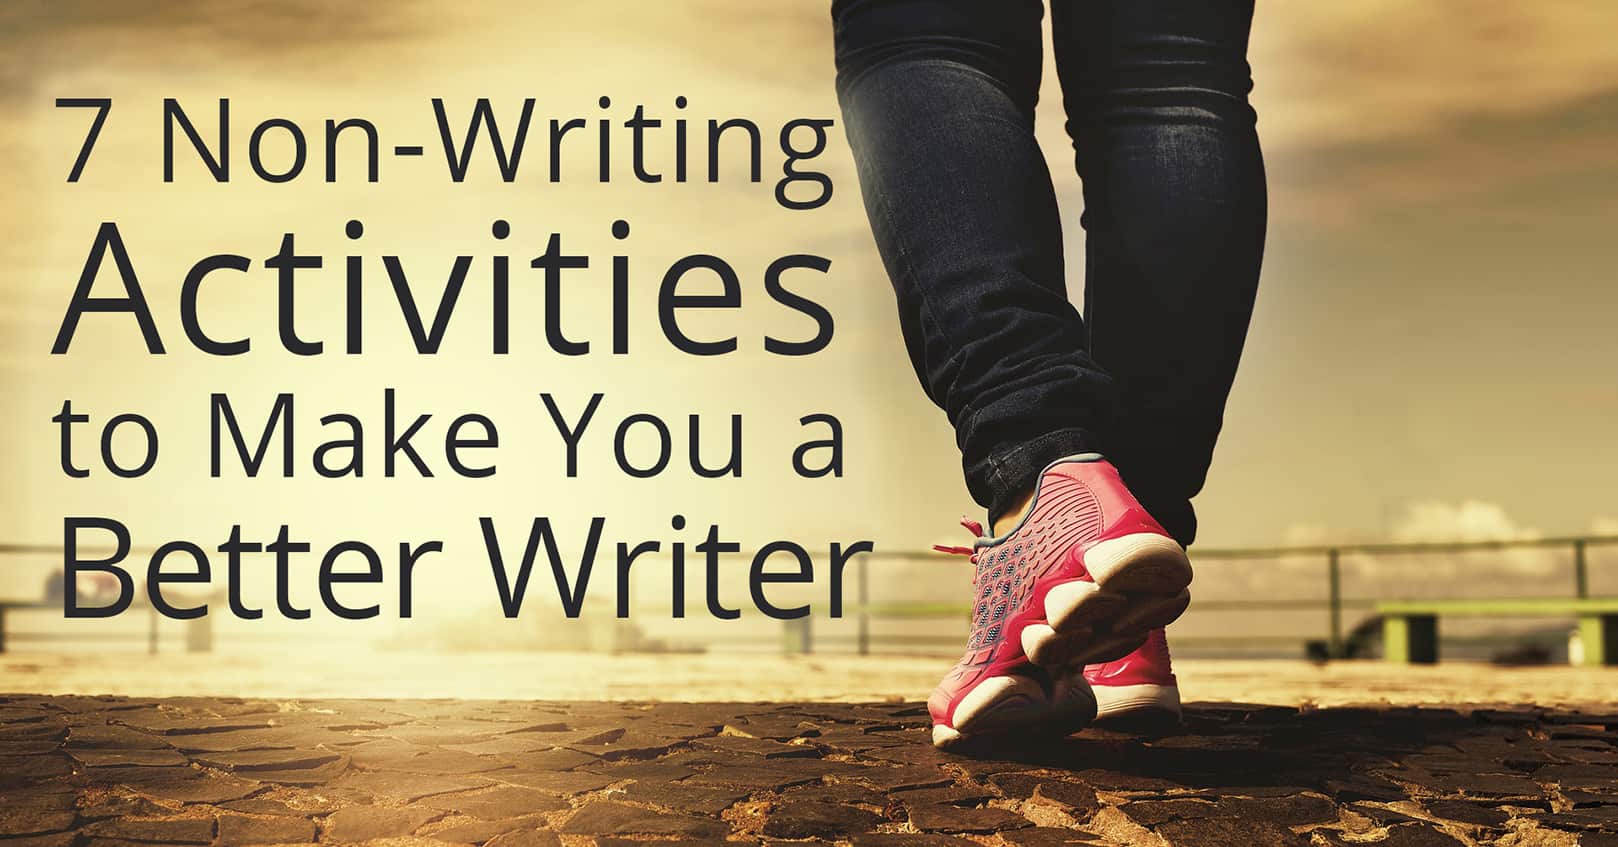 non-writing activities to make you a better writer